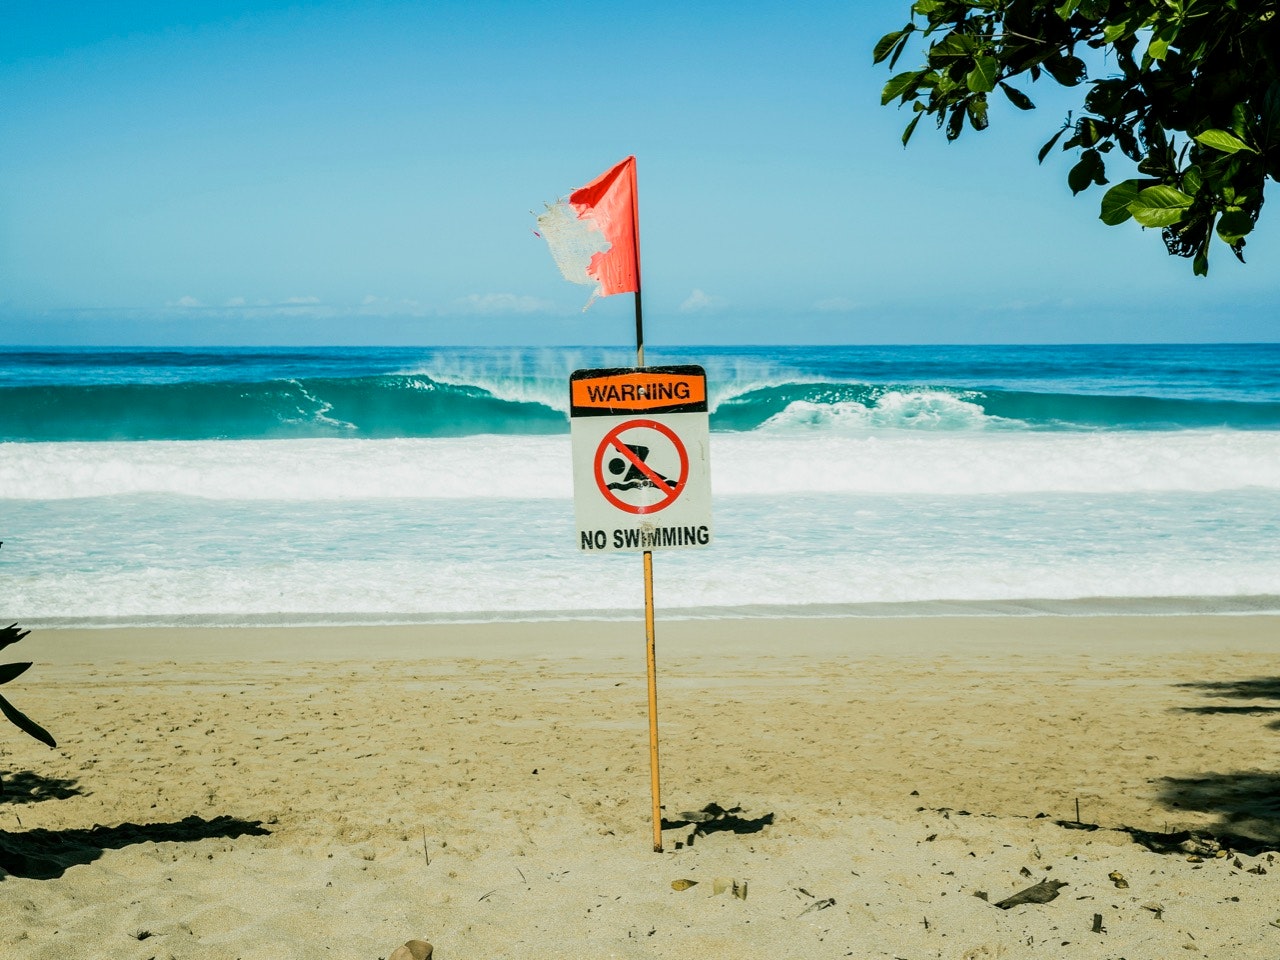 No swimming sign with flag at beach